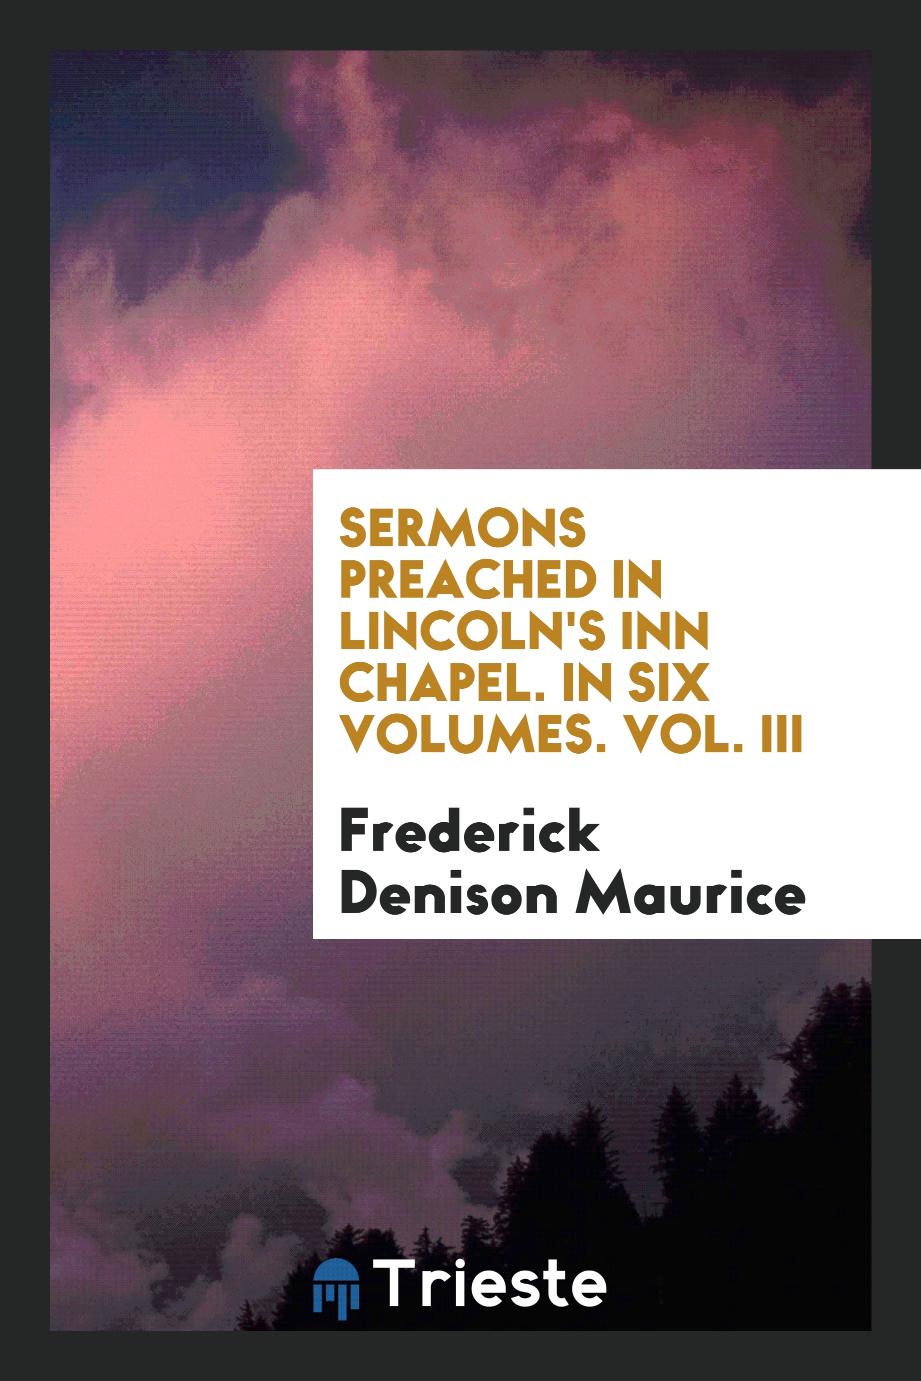 Sermons Preached in Lincoln's Inn Chapel. In Six Volumes. Vol. III